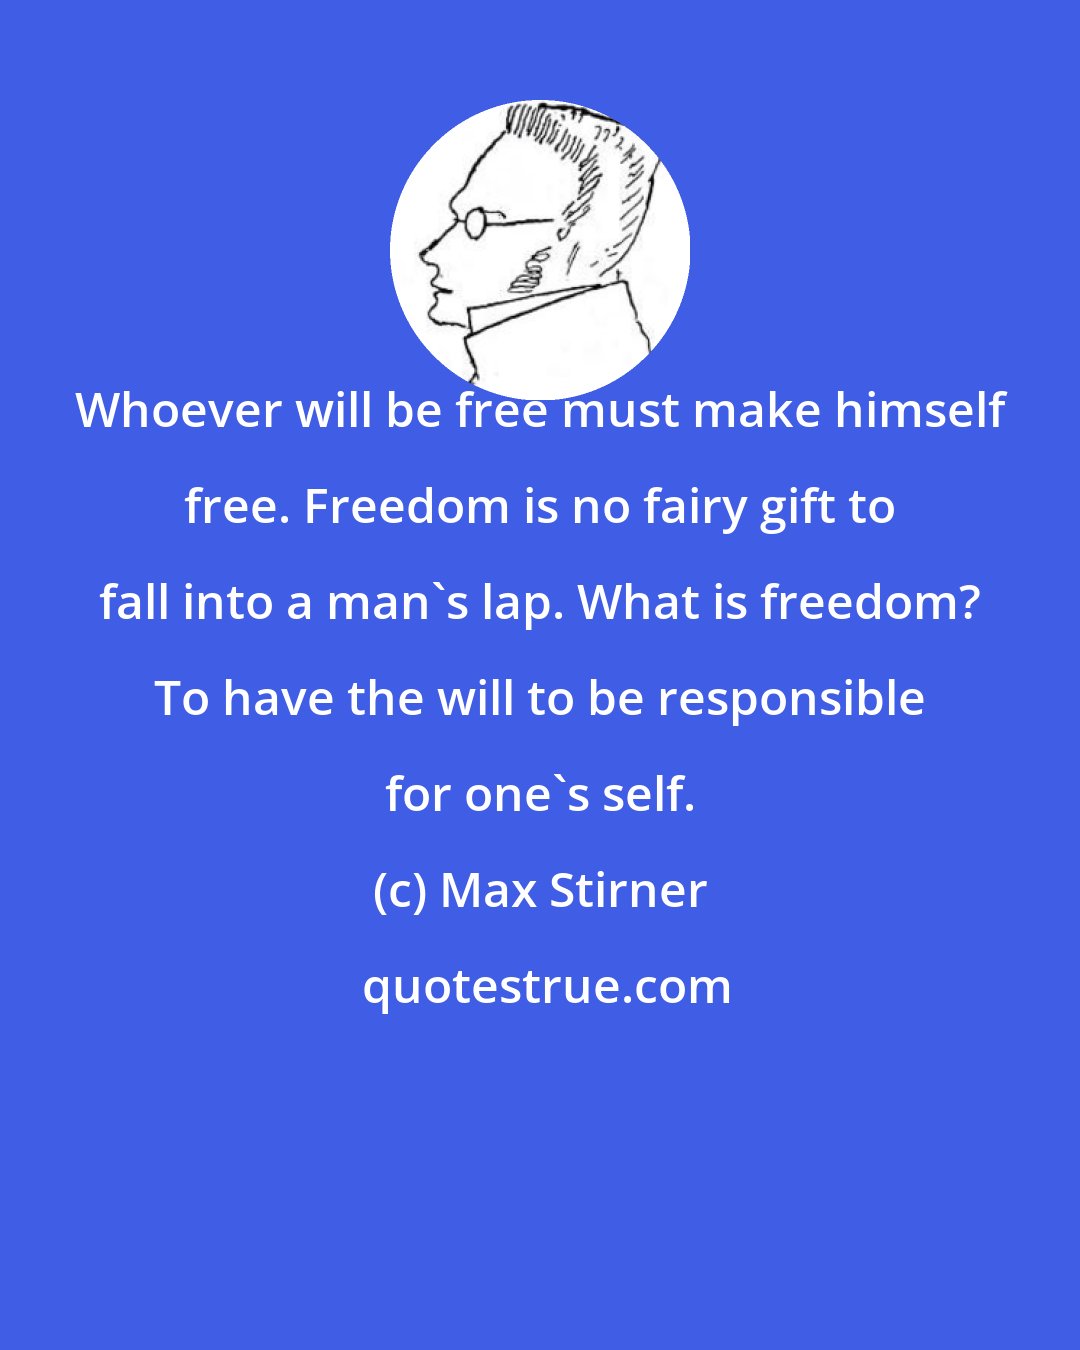 Max Stirner: Whoever will be free must make himself free. Freedom is no fairy gift to fall into a man's lap. What is freedom? To have the will to be responsible for one's self.